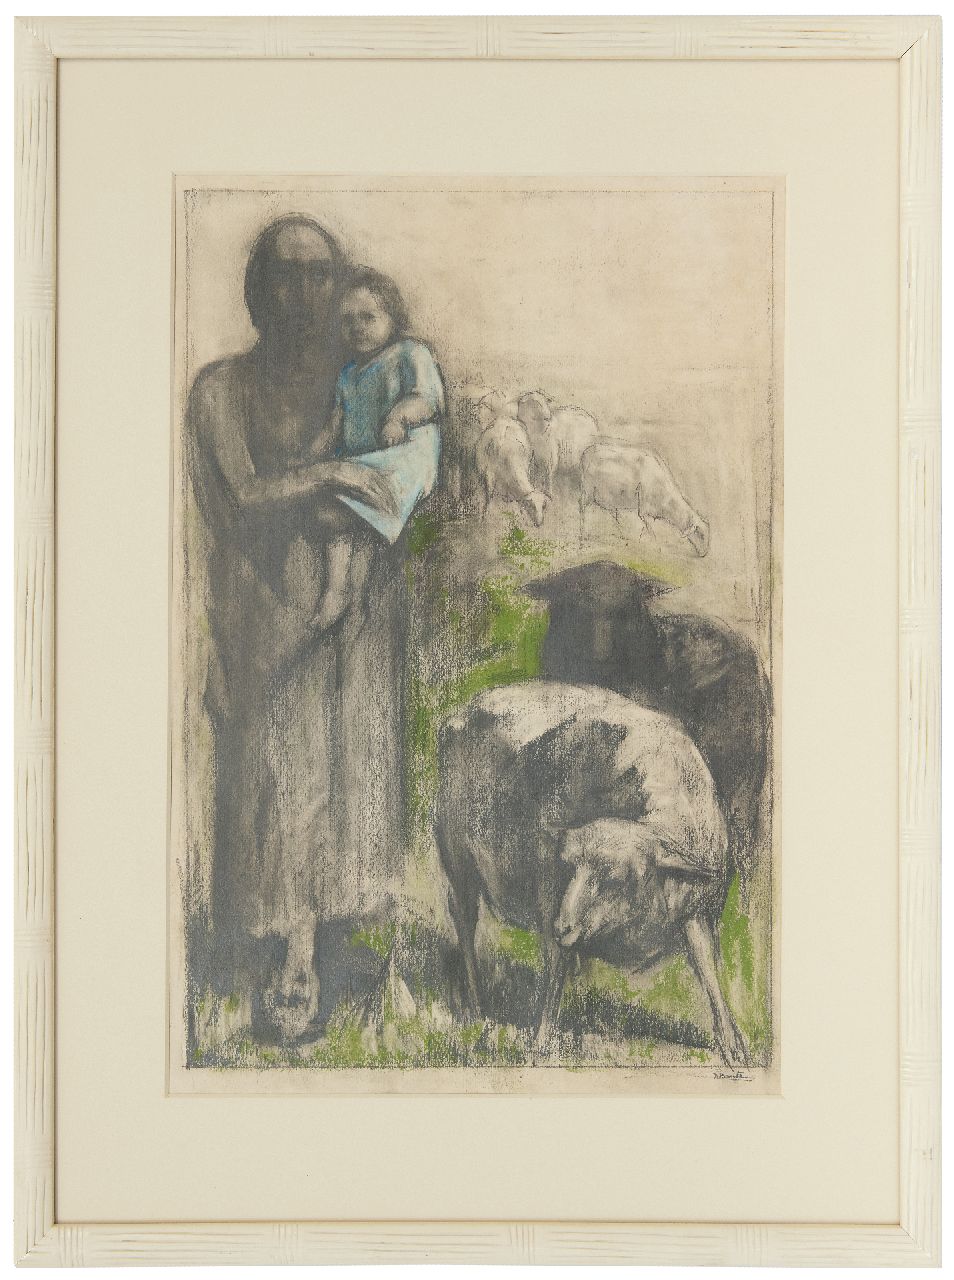 Bautz D.  | David Bautz | Watercolours and drawings offered for sale | A shepherd with a child, pastel on paper 47.6 x 32.2 cm, signed l.r.